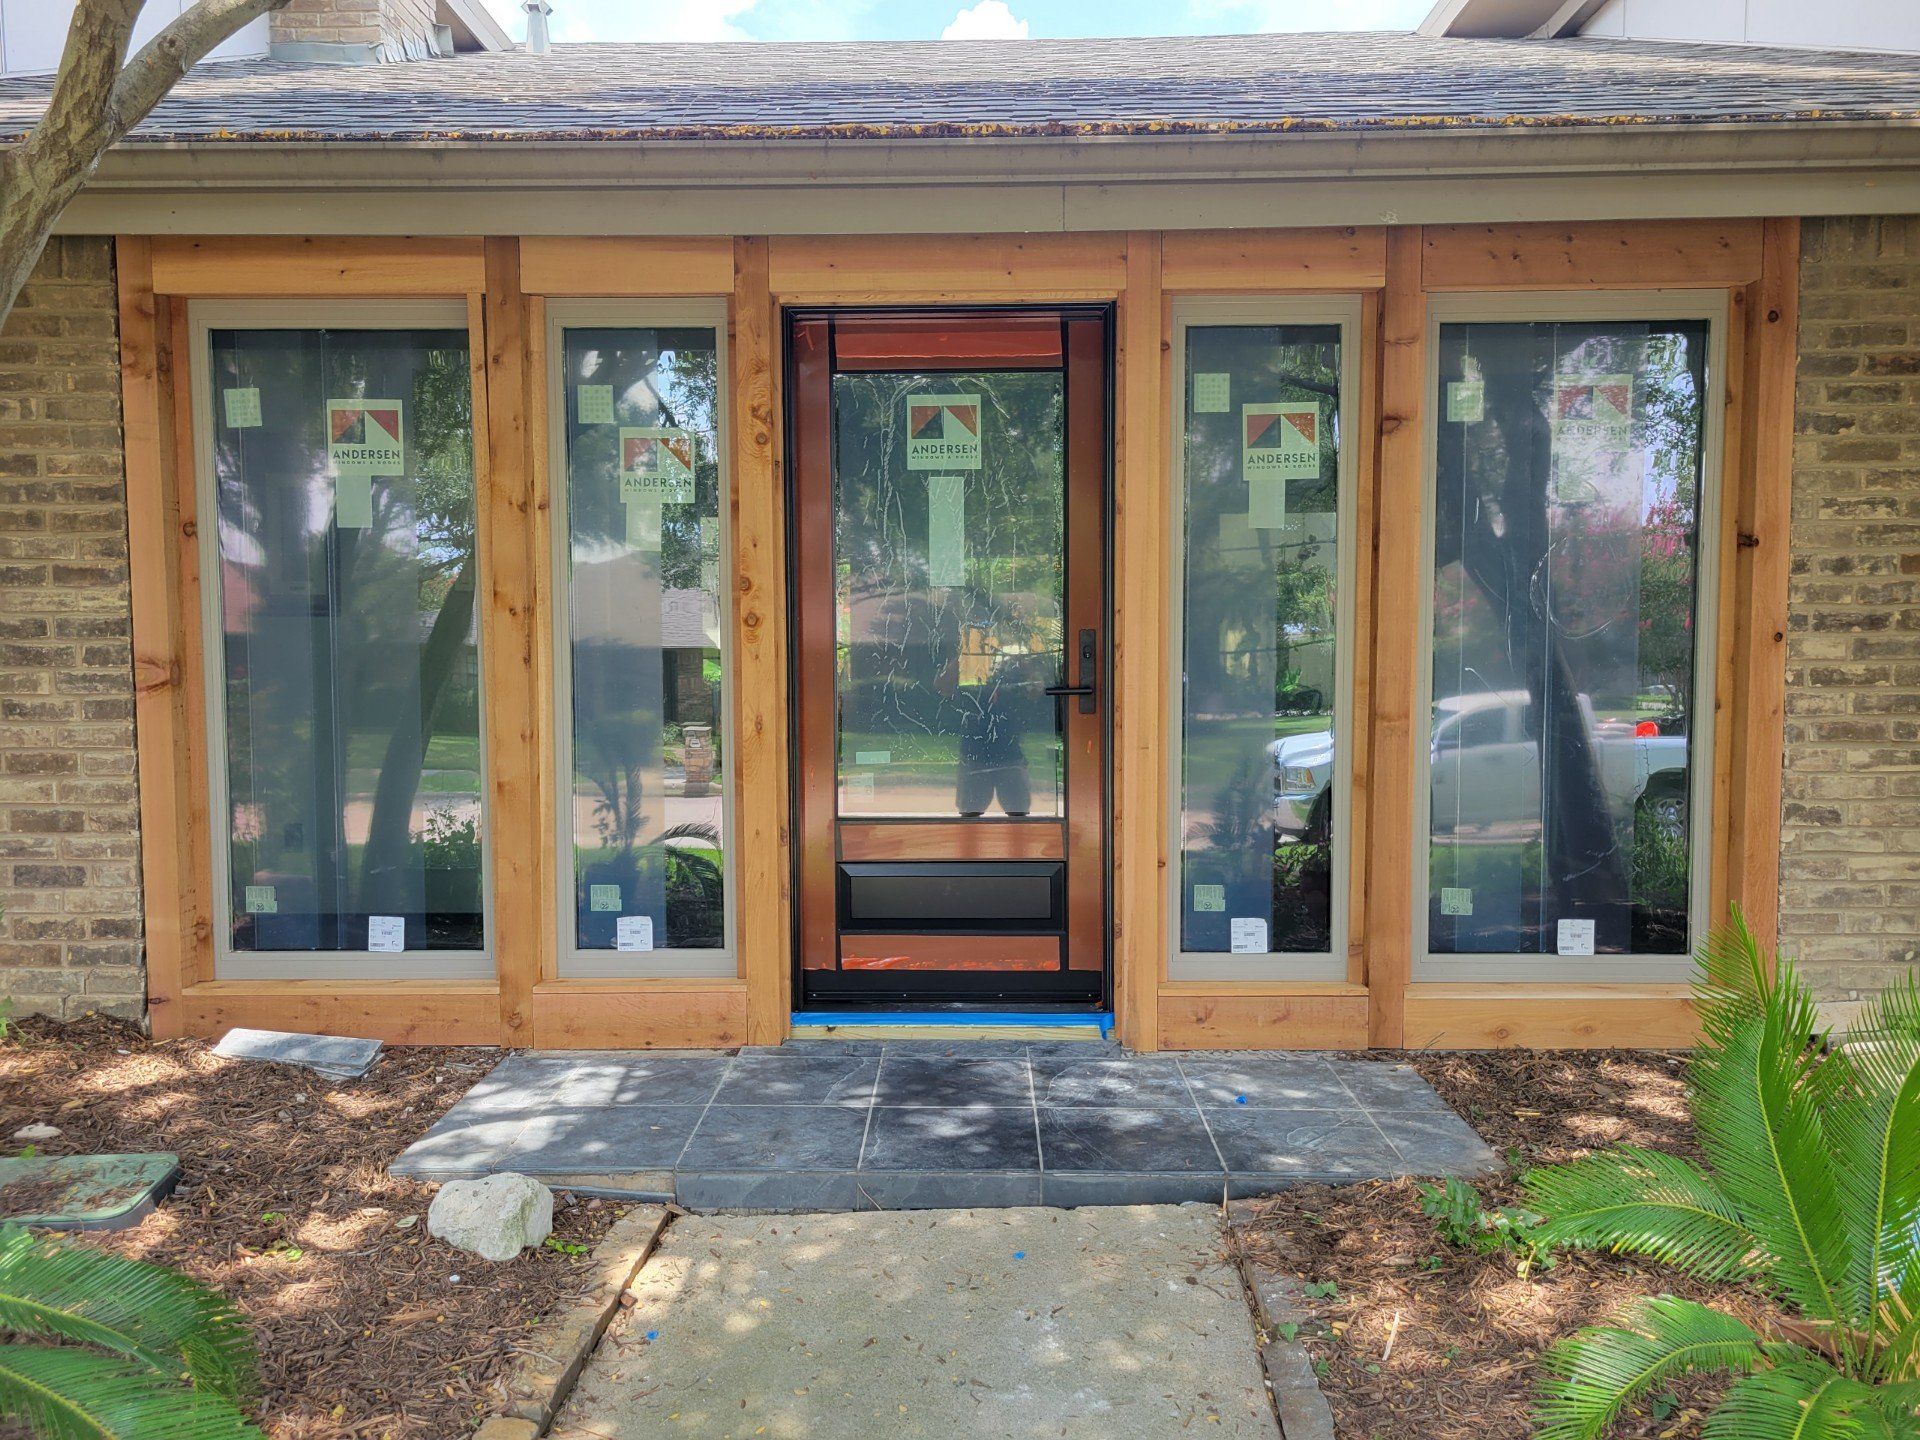 Preview Construction installing an Andersen Architectural front door with Andersen 100 Series fixed units in Sandstone Turnkey Finish.